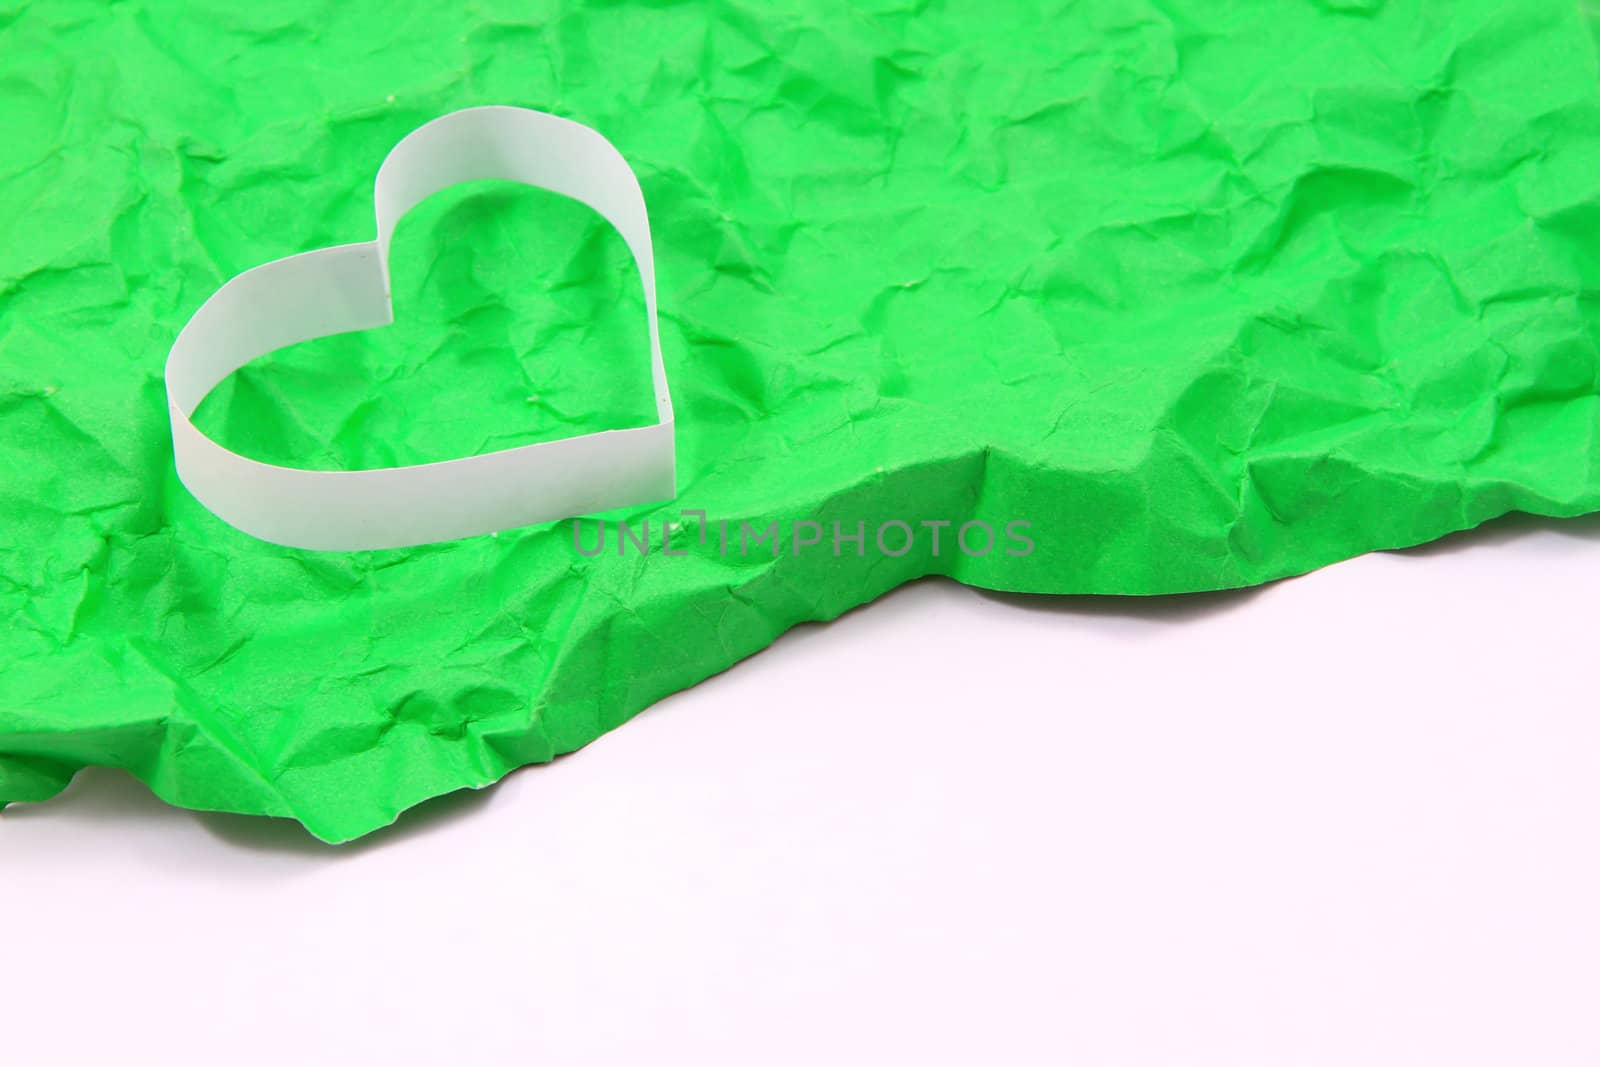 Paper hearts on green background  by rufous